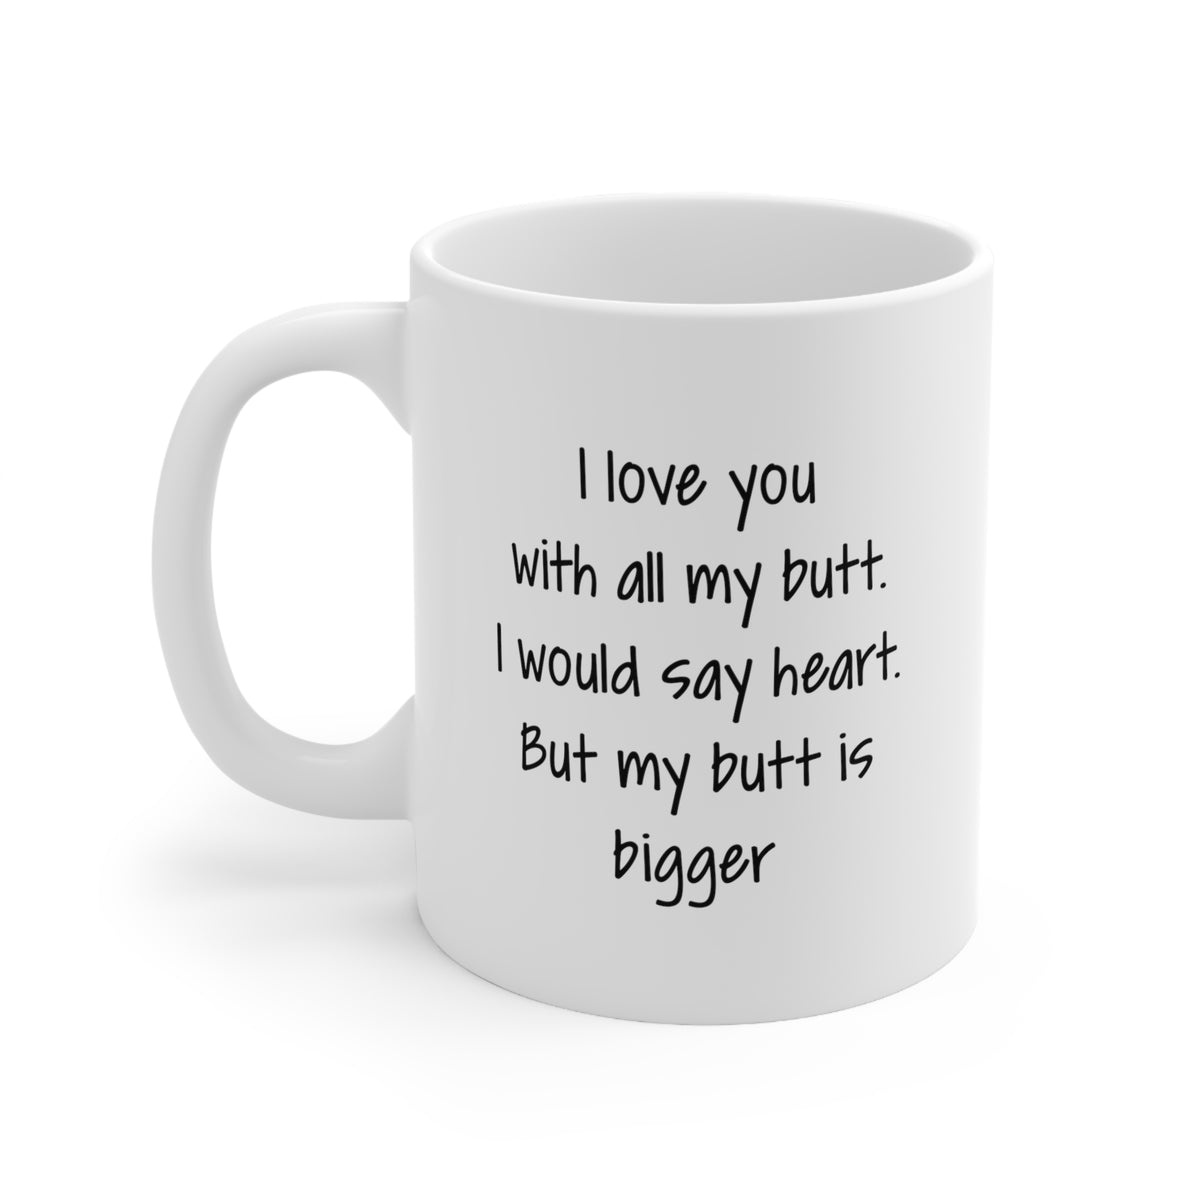 Valentine's Day Coffee Mug - I love you with all my butt - Funny Gifts For Boyfriend From Girlfriend